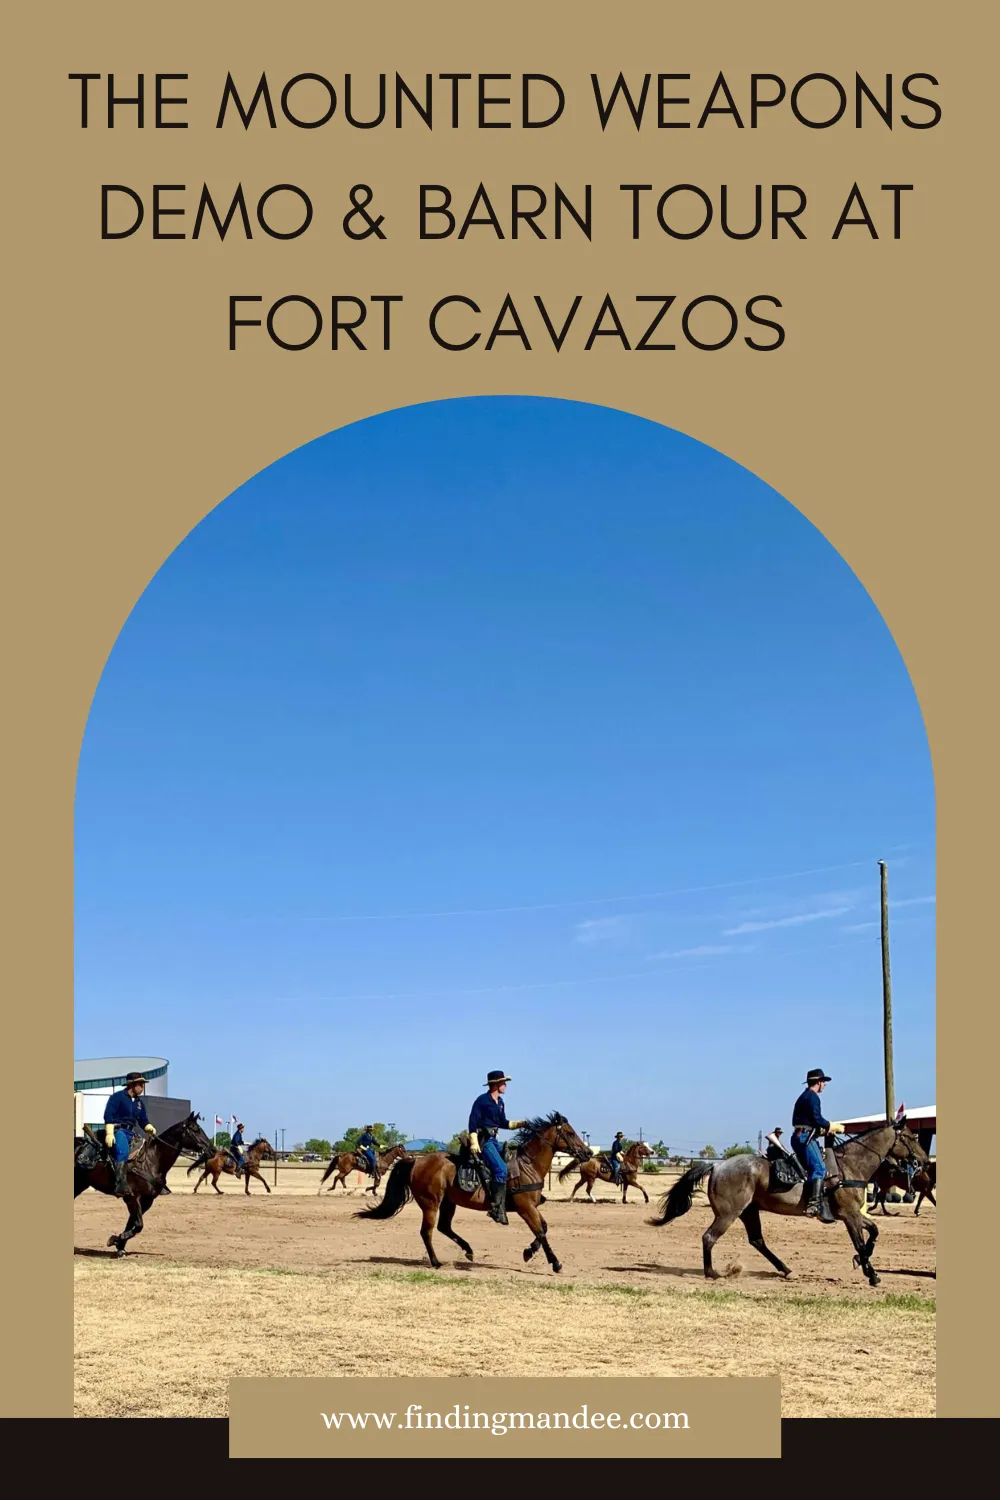 The Mounted Weapons Demonstration and Barn Tour at Fort Cavazos are open to the public! | Finding Mandee